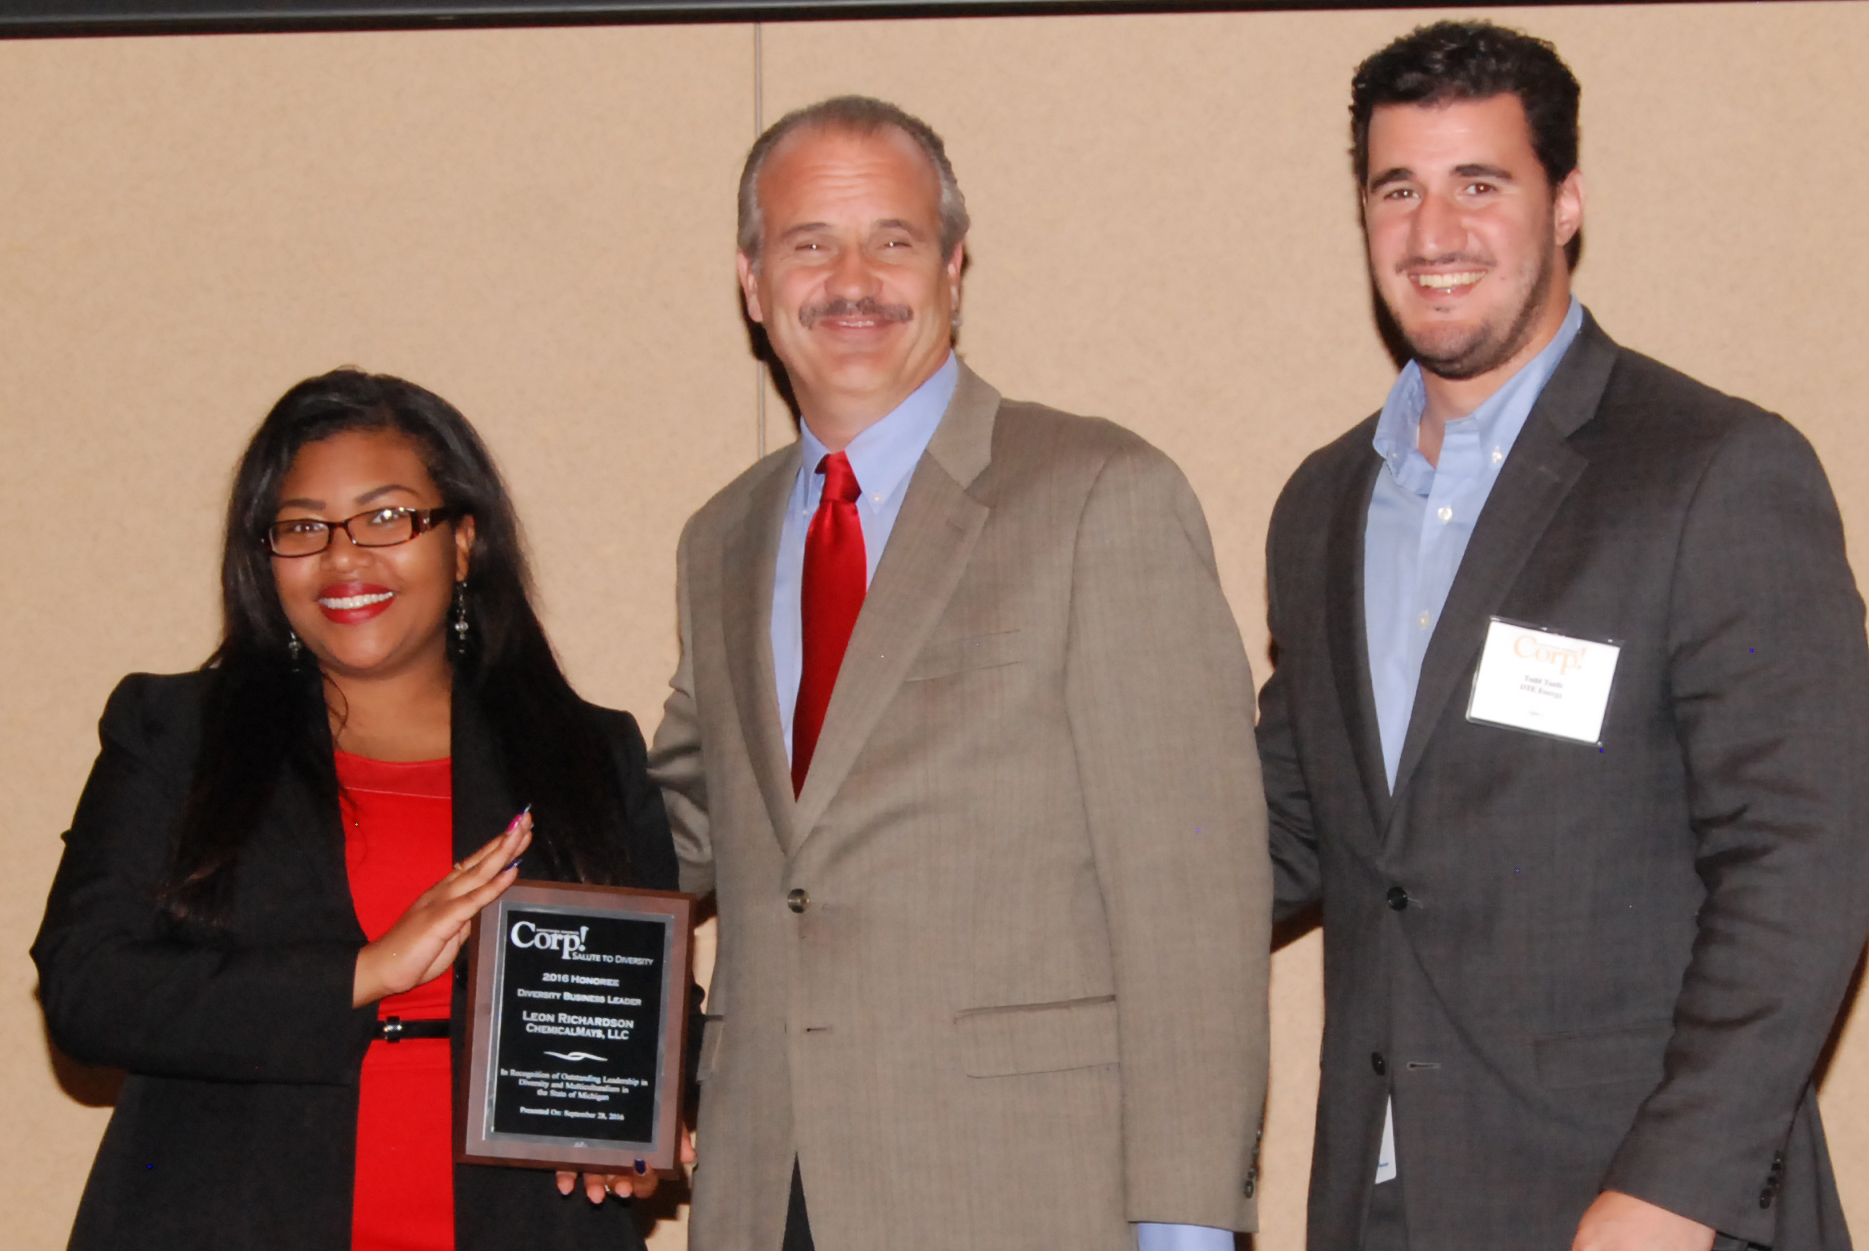 Accepting the Corp! Business Diversity Leadership Award on behalf of Chemico are Tiana Dudley of The Allen Lewis Agency (Left) Paul Duff of The Chemico Group (Center) and Corp! Magazine representative